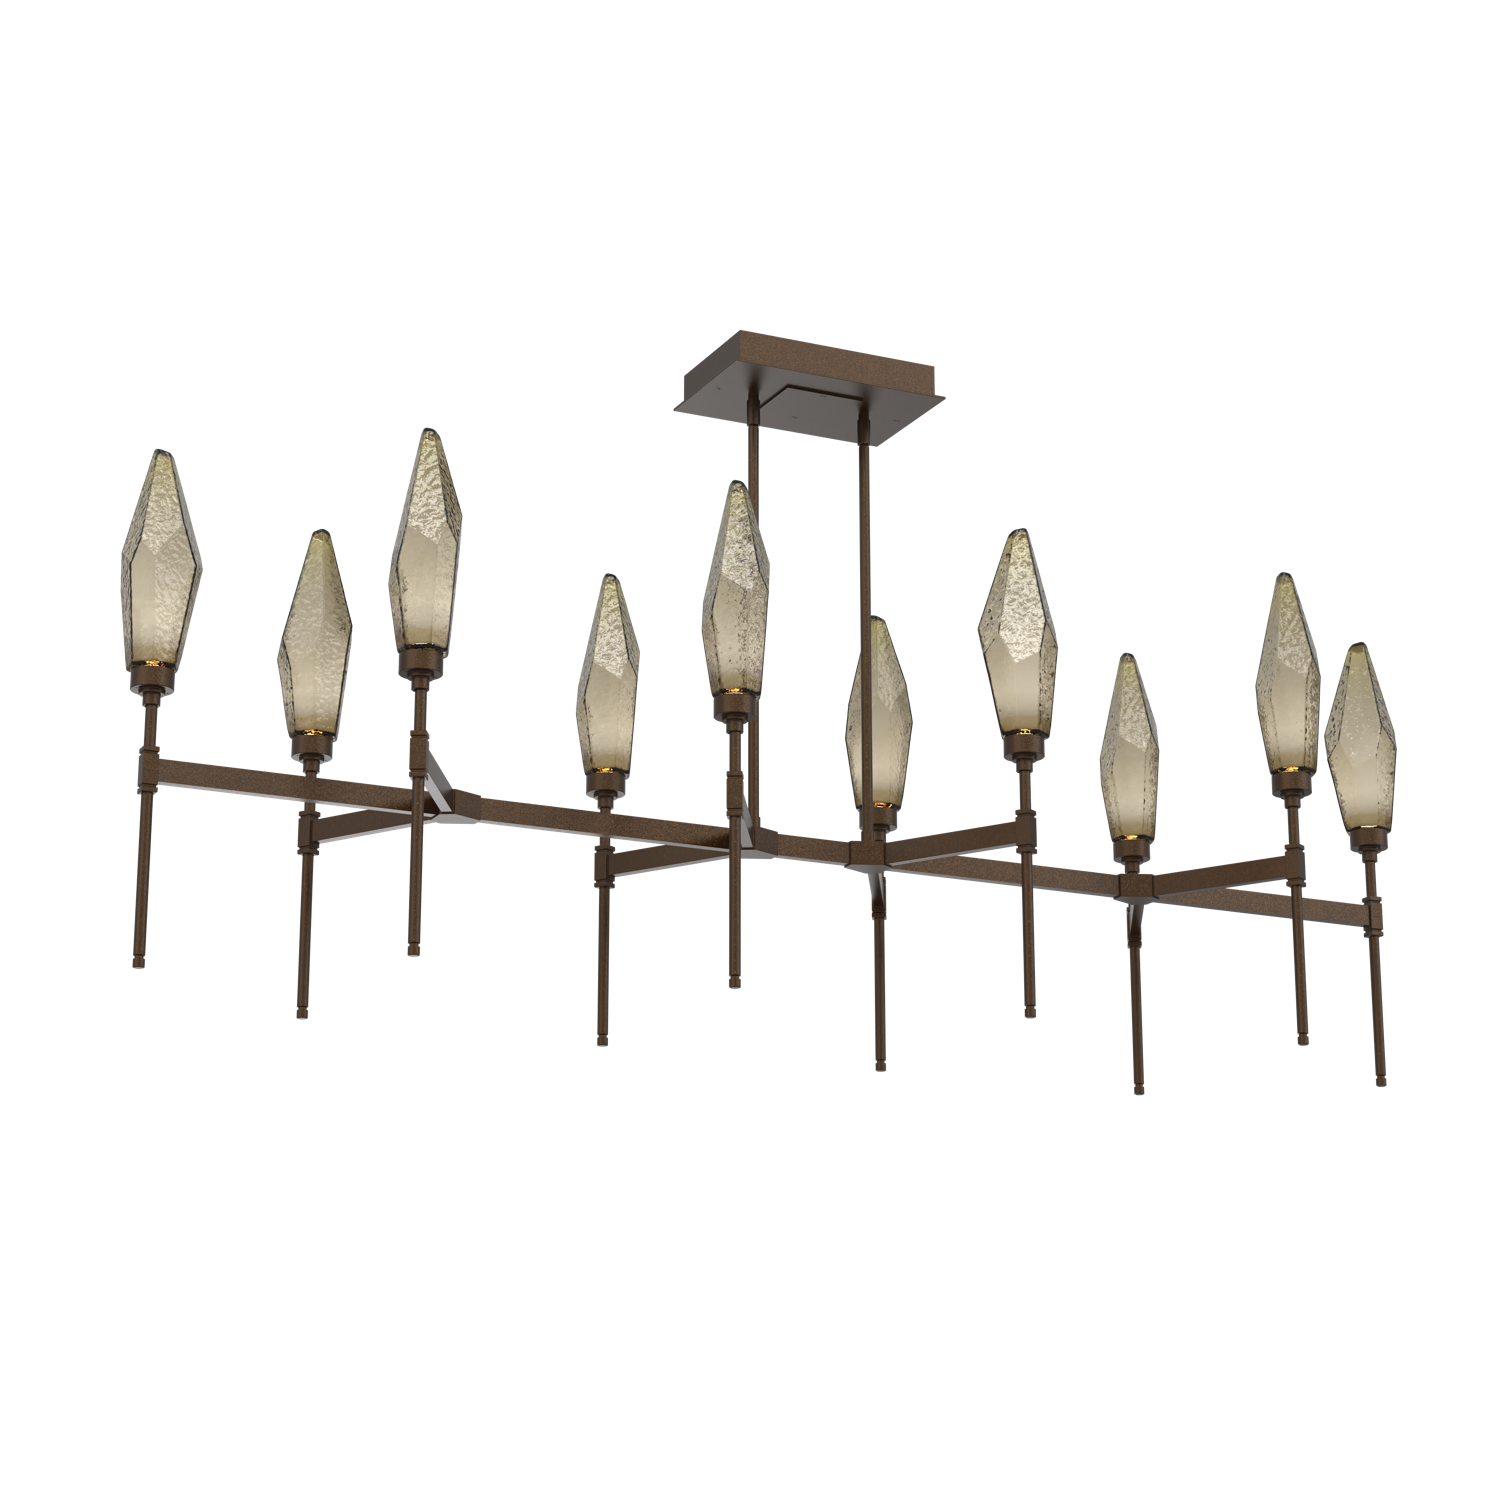 PLB0050-67-FB-CB-Hammerton-Studio-Rock-Crystal-67-inch-linear-belvedere-chandelier-with-flat-bronze-finish-and-chilled-bronze-blown-glass-shades-and-LED-lamping